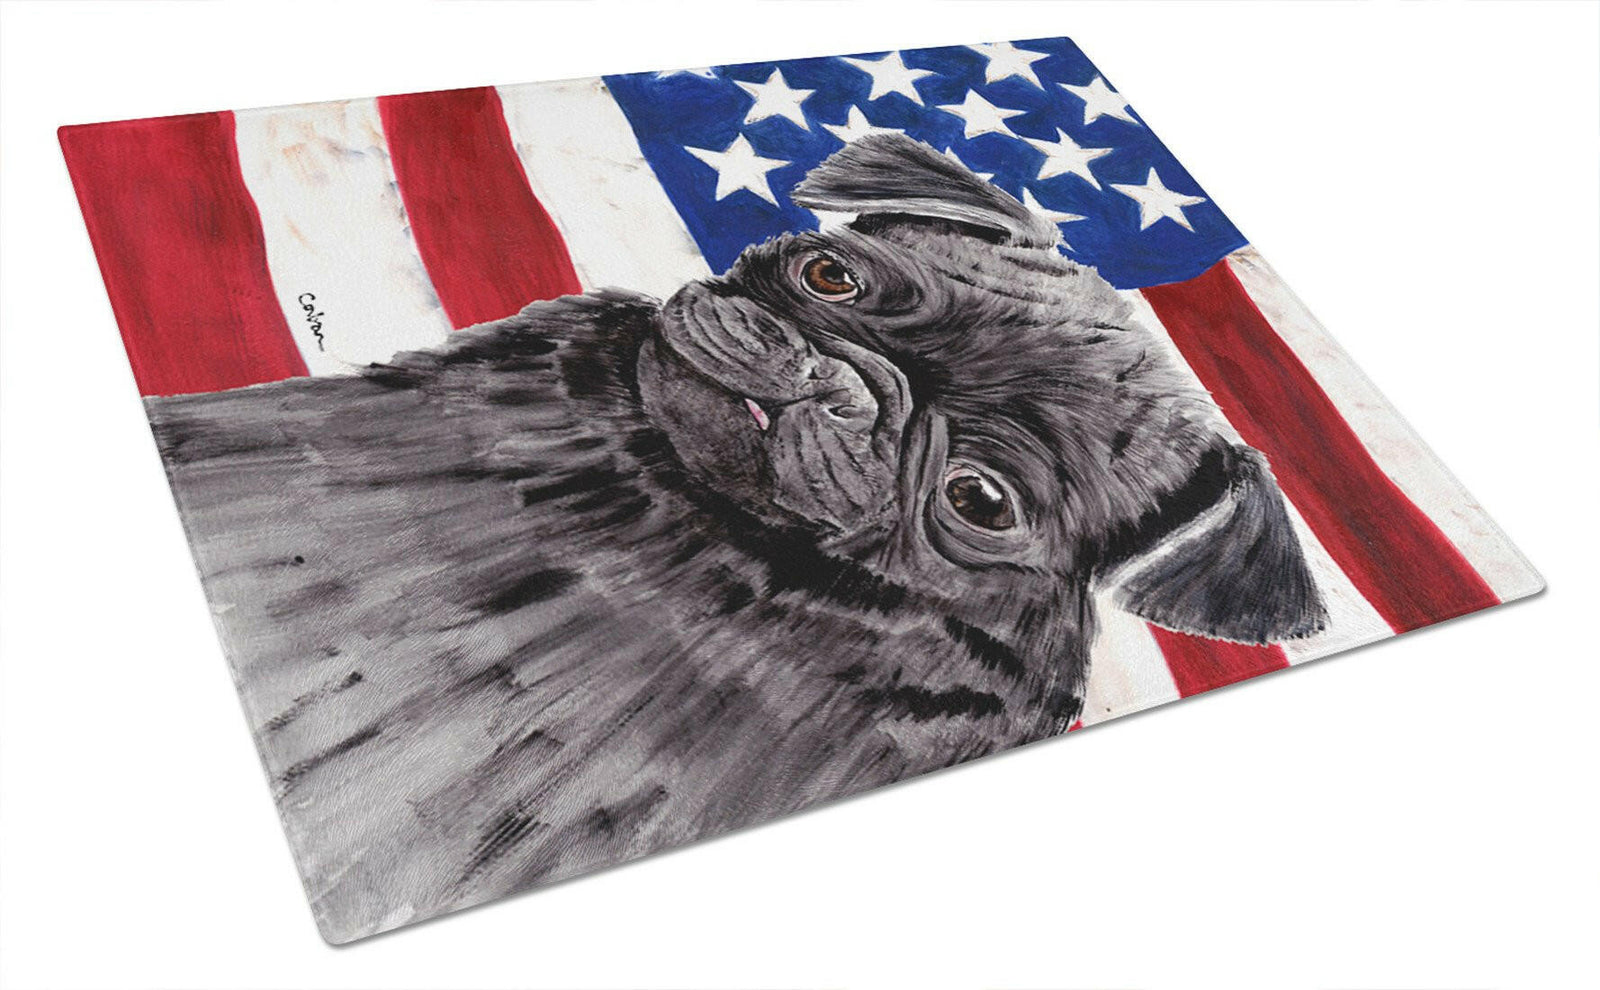 USA American Flag with Pug Glass Cutting Board Large by Caroline's Treasures